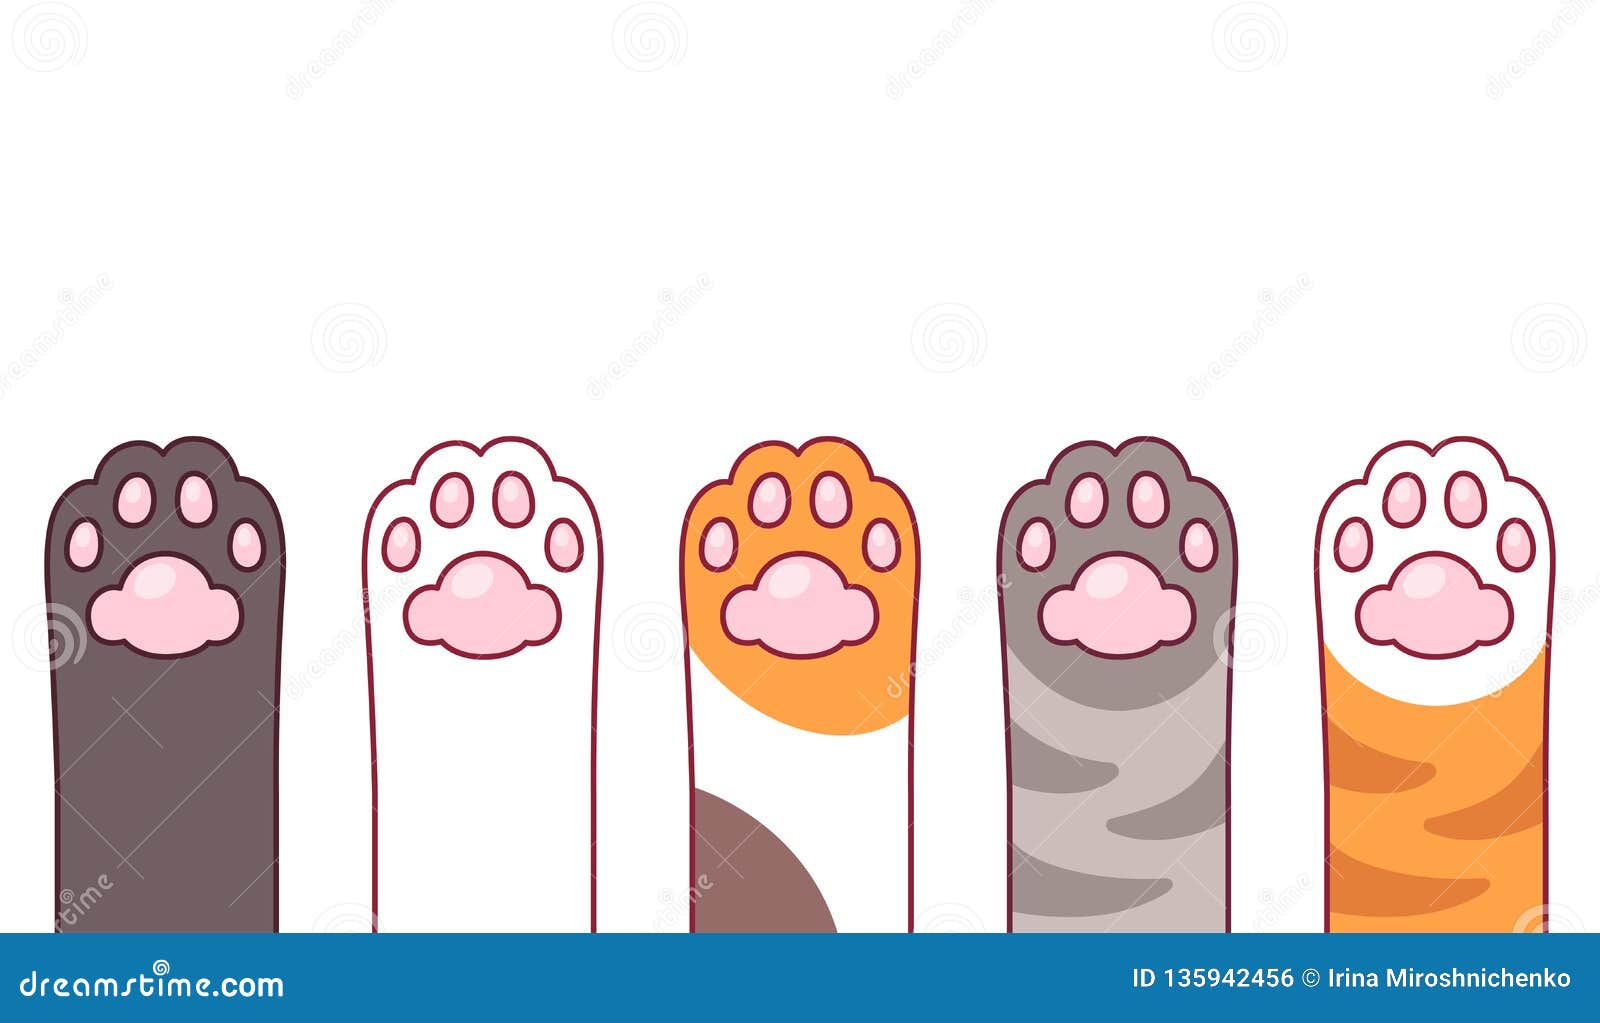 Cute cat paws set stock vector. Illustration of gray - 135942456